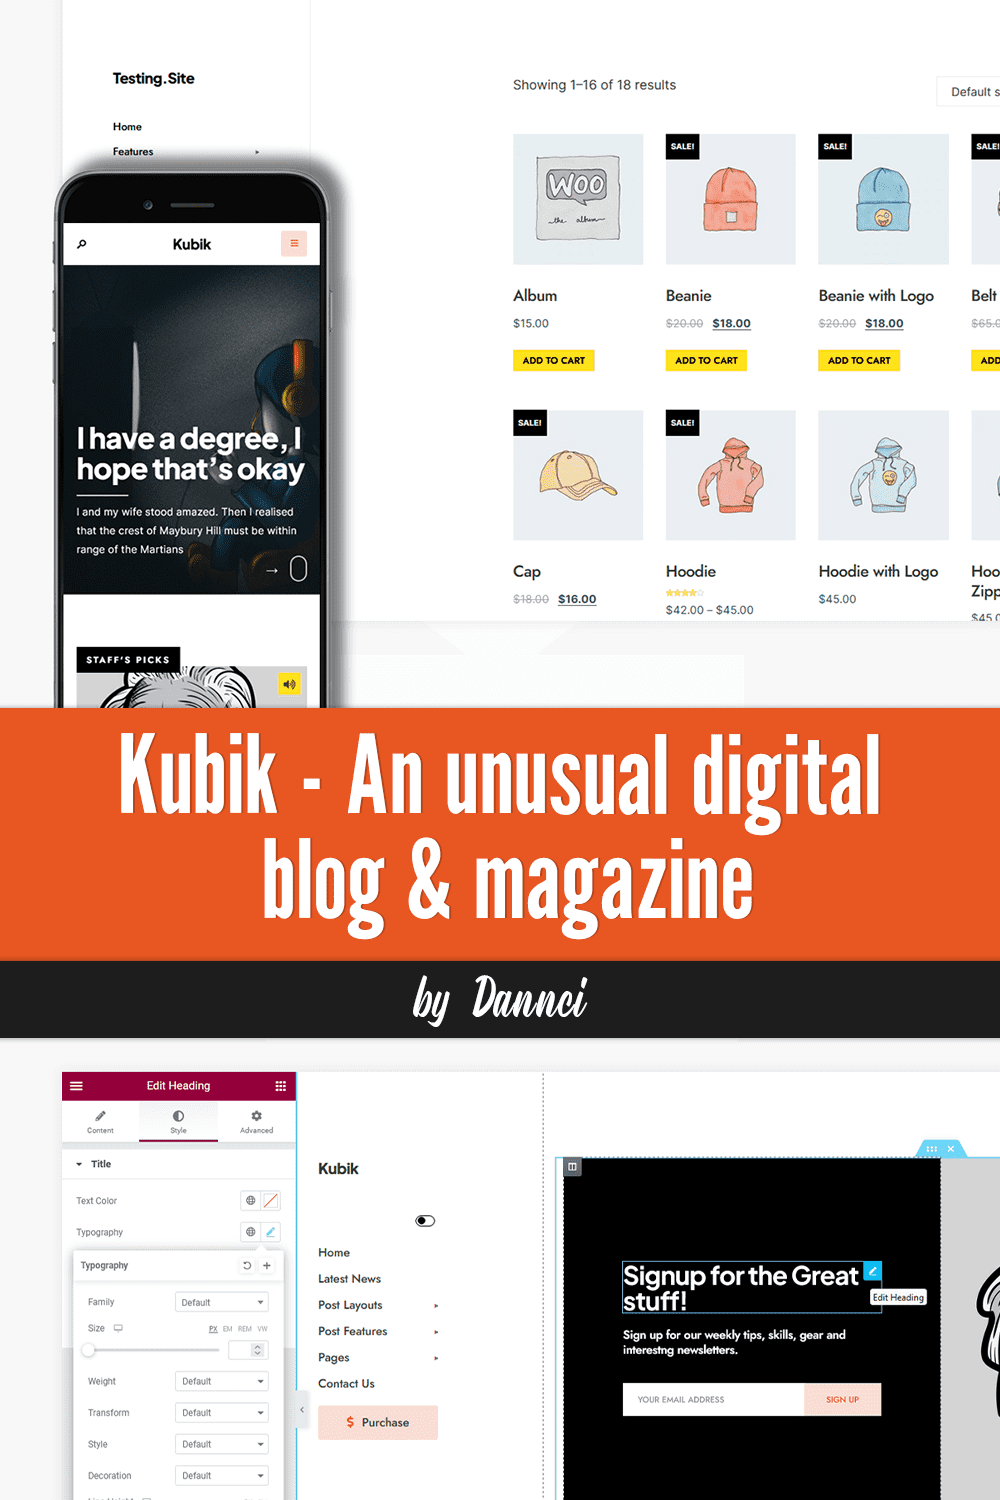 Preview Kubik - An Unusual Digital Blog & Magazine on the mobile.